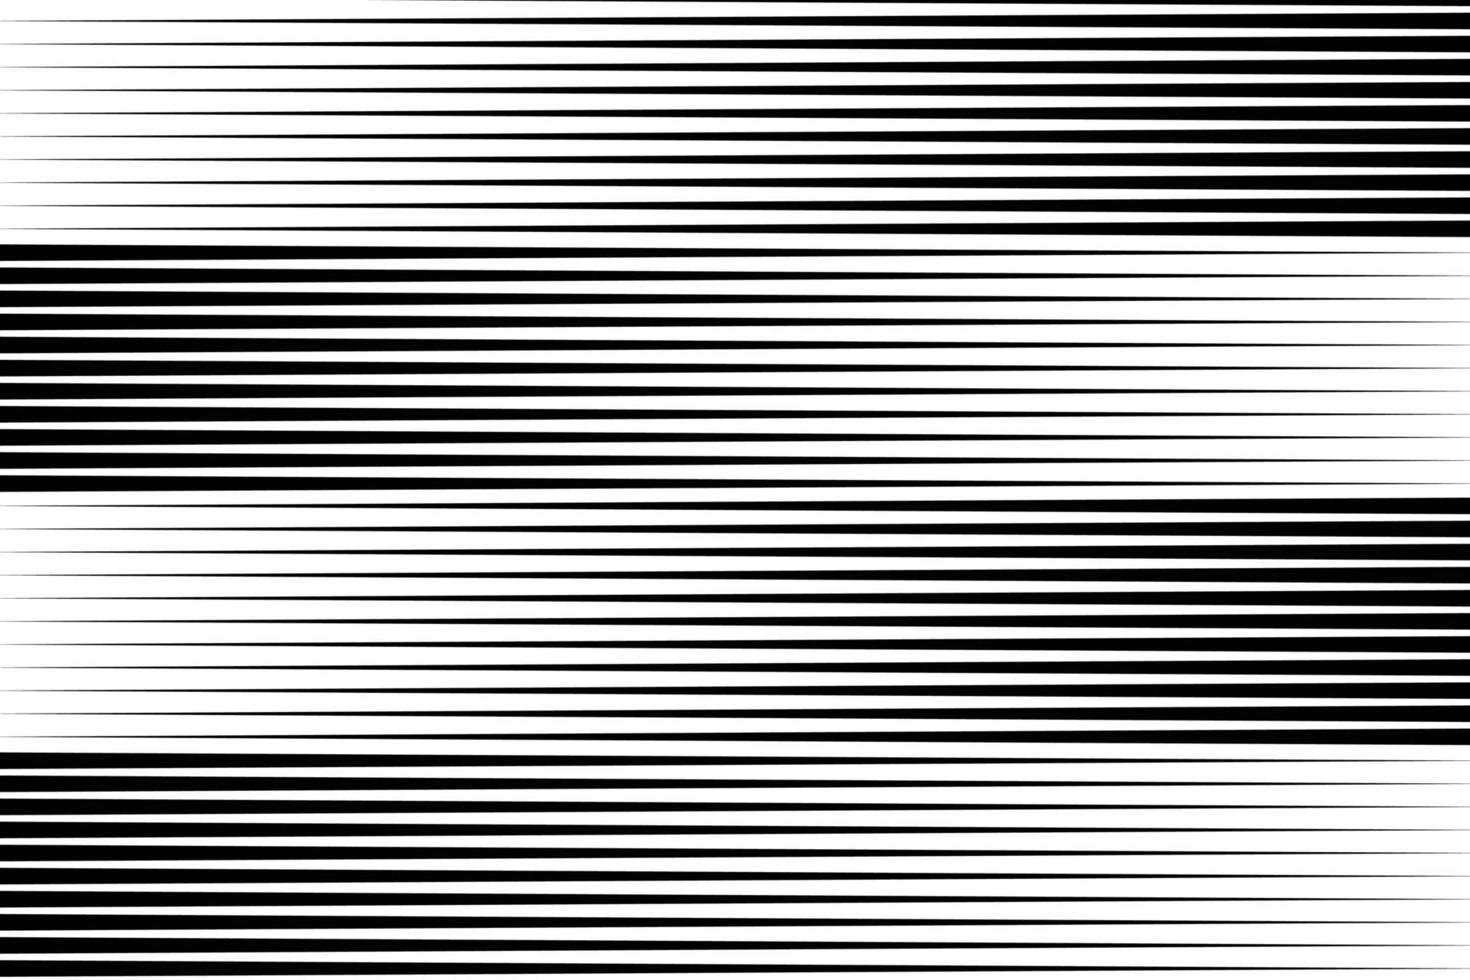 abstract diagonal lines oblique edgy pattern. vector